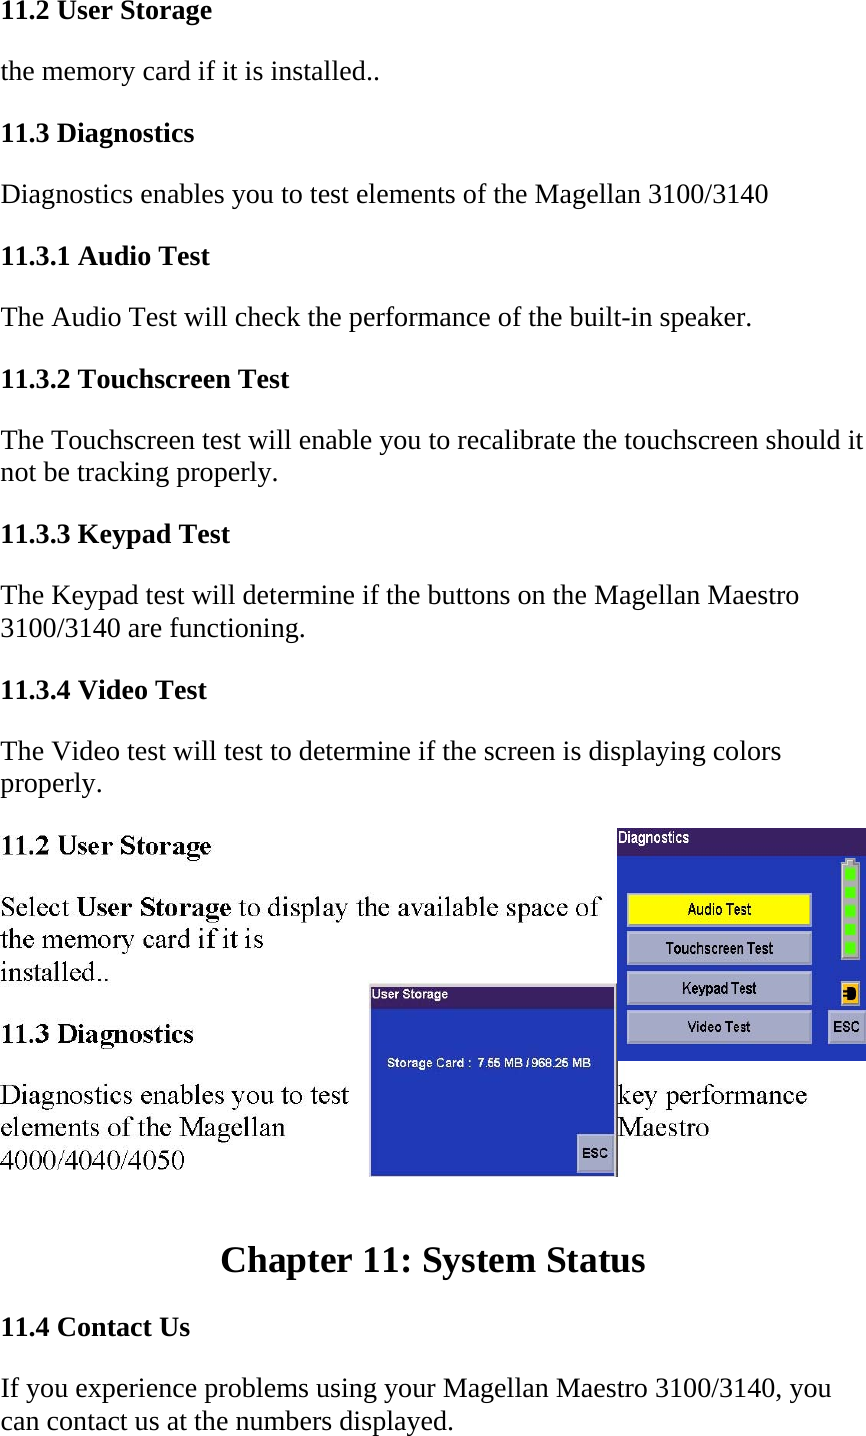 11.2 User Storage  the memory card if it is installed..  11.3 Diagnostics  Diagnostics enables you to test elements of the Magellan 3100/3140  11.3.1 Audio Test  The Audio Test will check the performance of the built-in speaker.  11.3.2 Touchscreen Test  The Touchscreen test will enable you to recalibrate the touchscreen should it not be tracking properly.  11.3.3 Keypad Test  The Keypad test will determine if the buttons on the Magellan Maestro 3100/3140 are functioning.  11.3.4 Video Test  The Video test will test to determine if the screen is displaying colors properly.   Chapter 11: System Status  11.4 Contact Us  If you experience problems using your Magellan Maestro 3100/3140, you can contact us at the numbers displayed.  